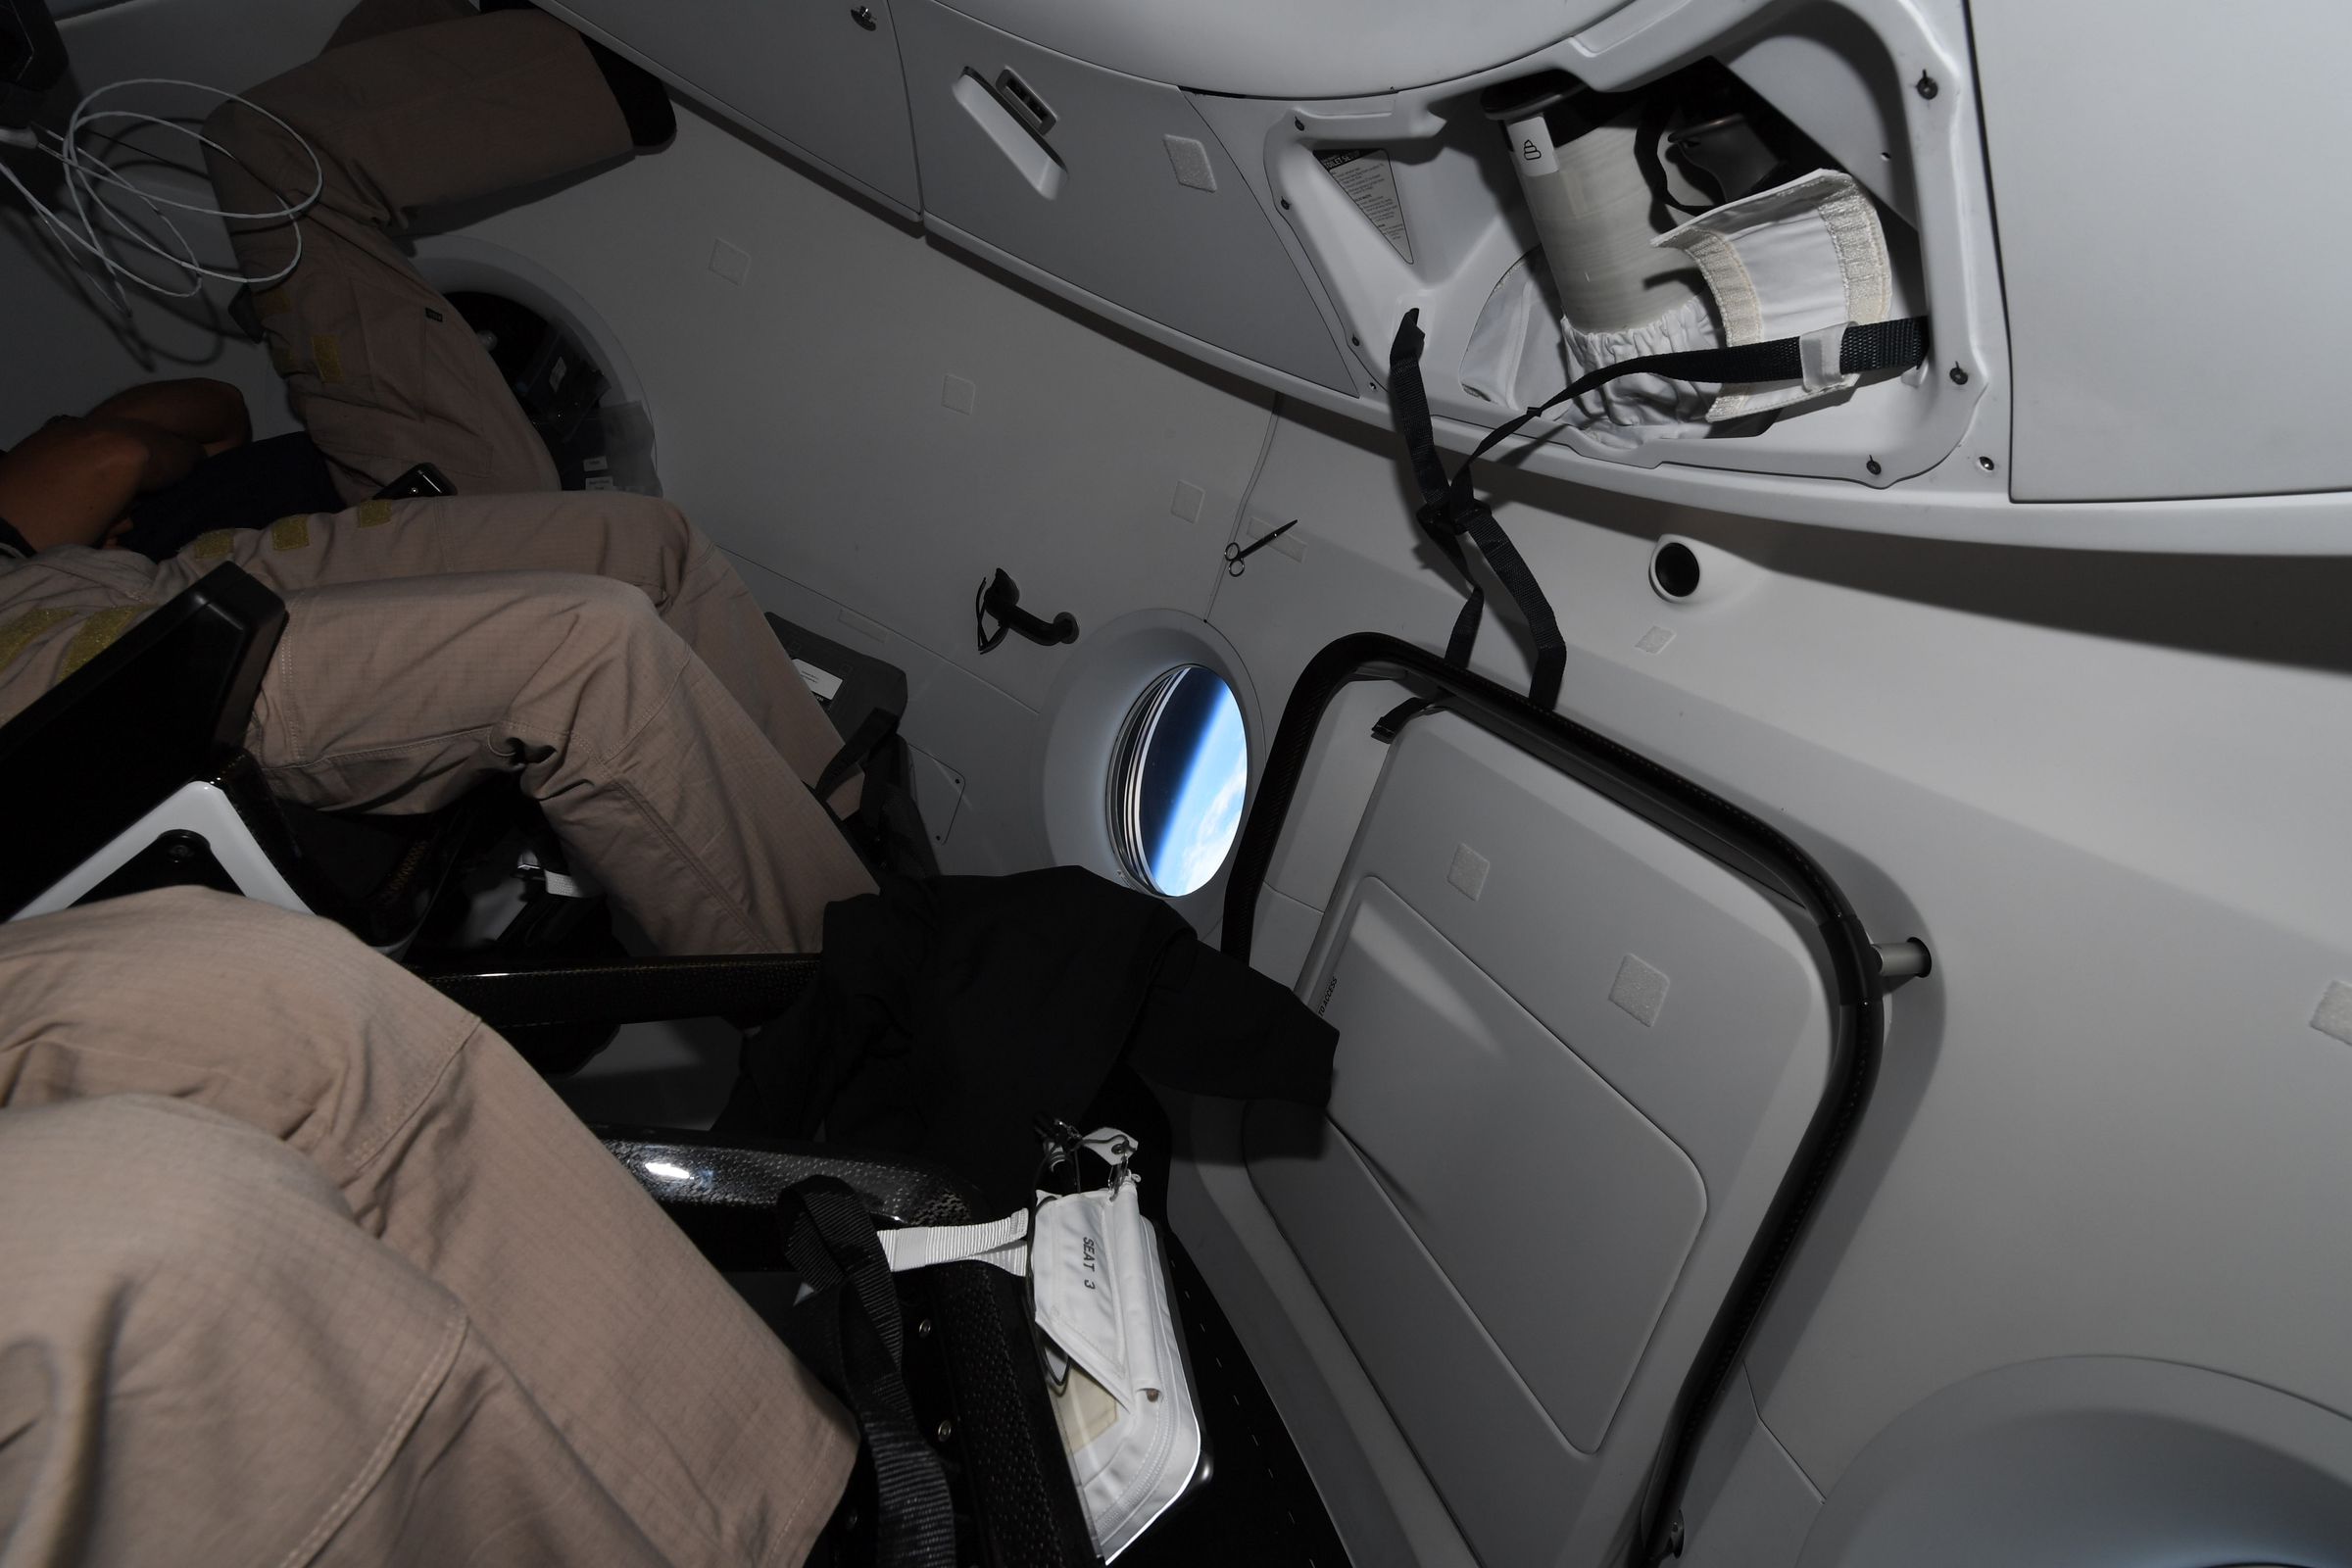 A glimpse at the toilet inside the Crew Dragon.